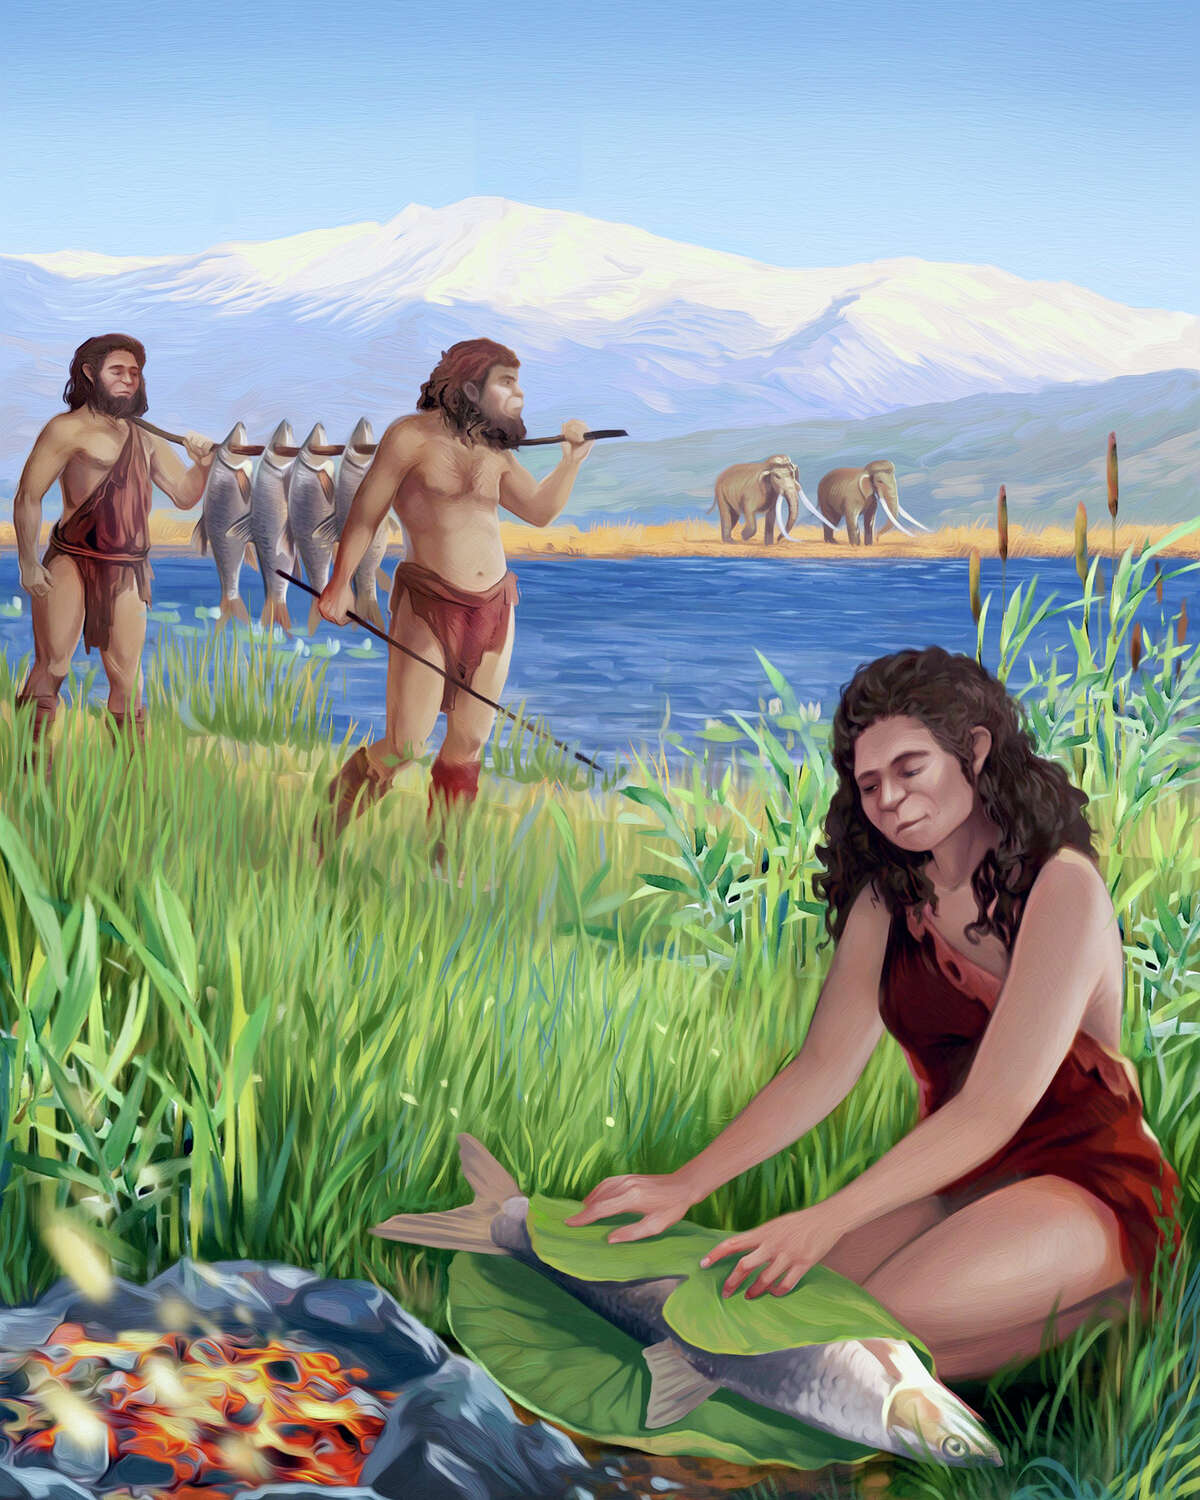 This illustration from Tel Aviv University depicts hominins preparing Luciobarbus longiceps fish on the shores of the ancient Lake Hula. A recent study found the oldest evidence of using fire to cook, dating back to 780,000 years ago.